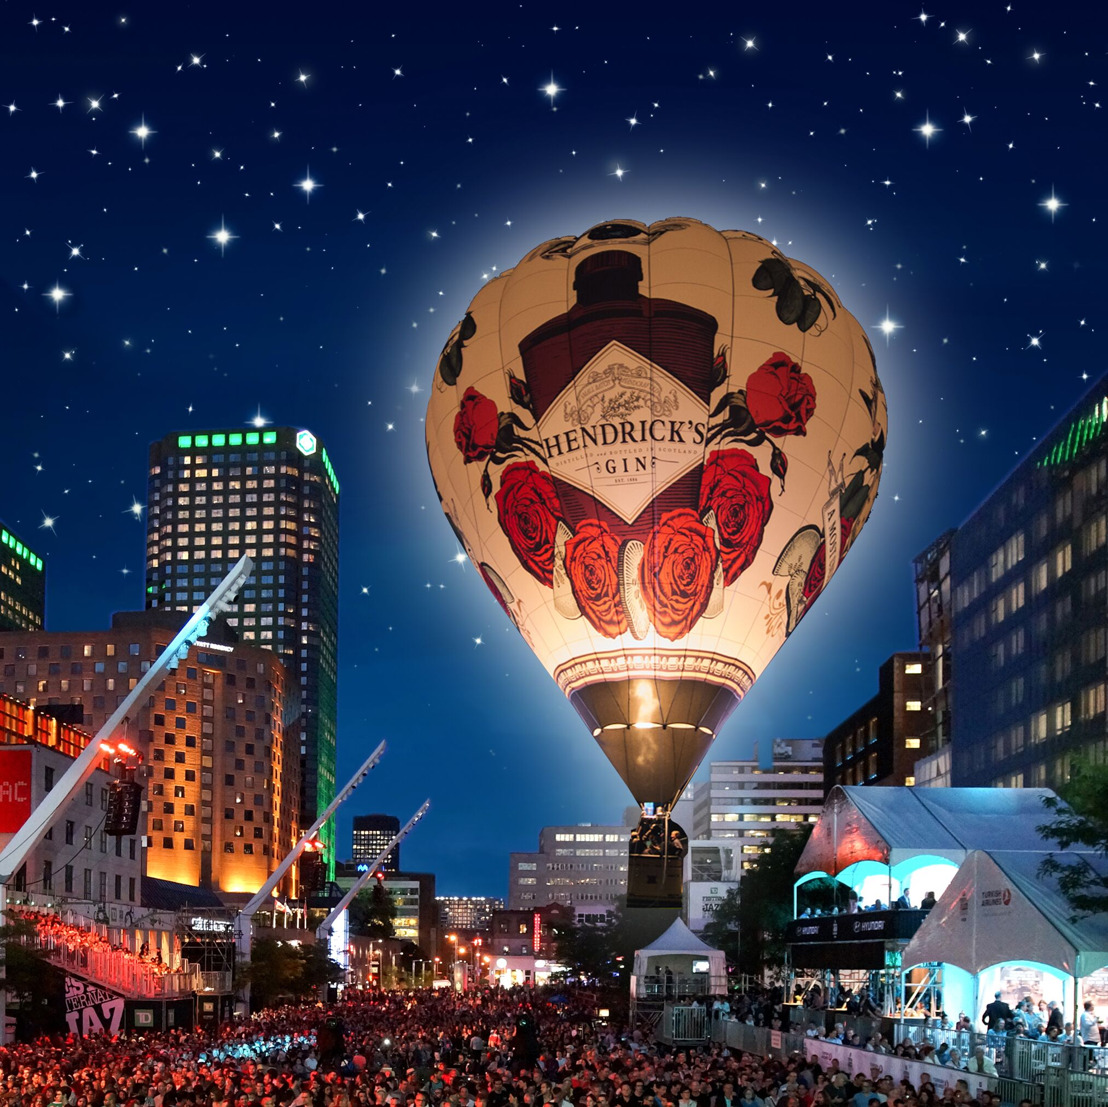 HENDRICK’S GIN PRESENTS AN UNUSUAL AND WHIMSICAL DUET OF SOAR AND SCORE AS ITS RECORD BREAKING E.L.E.V.A.T.U.M. LIGHTS UP THE SKIES AT THE 40th FESTIVAL INTERNATIONAL DE JAZZ DE MONTRÉAL